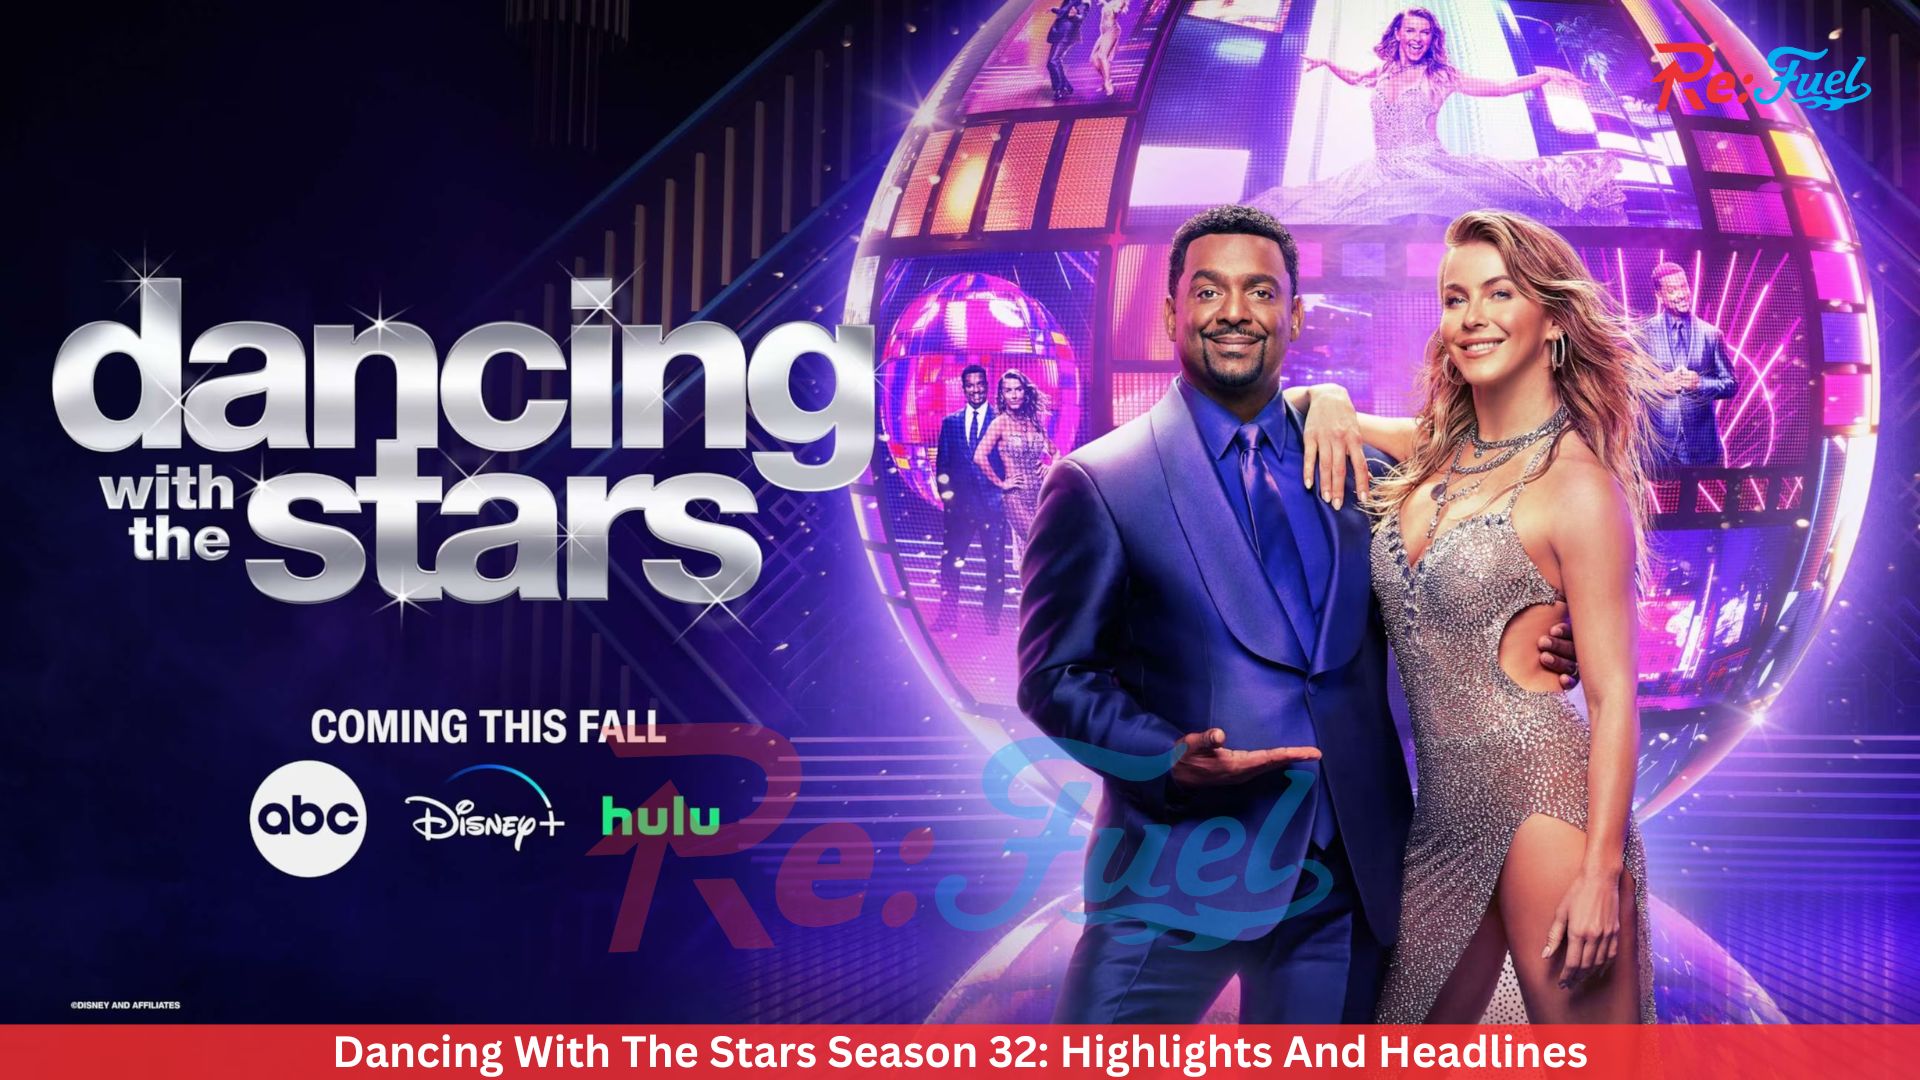 Dancing With The Stars Season 32: Highlights And Headlines